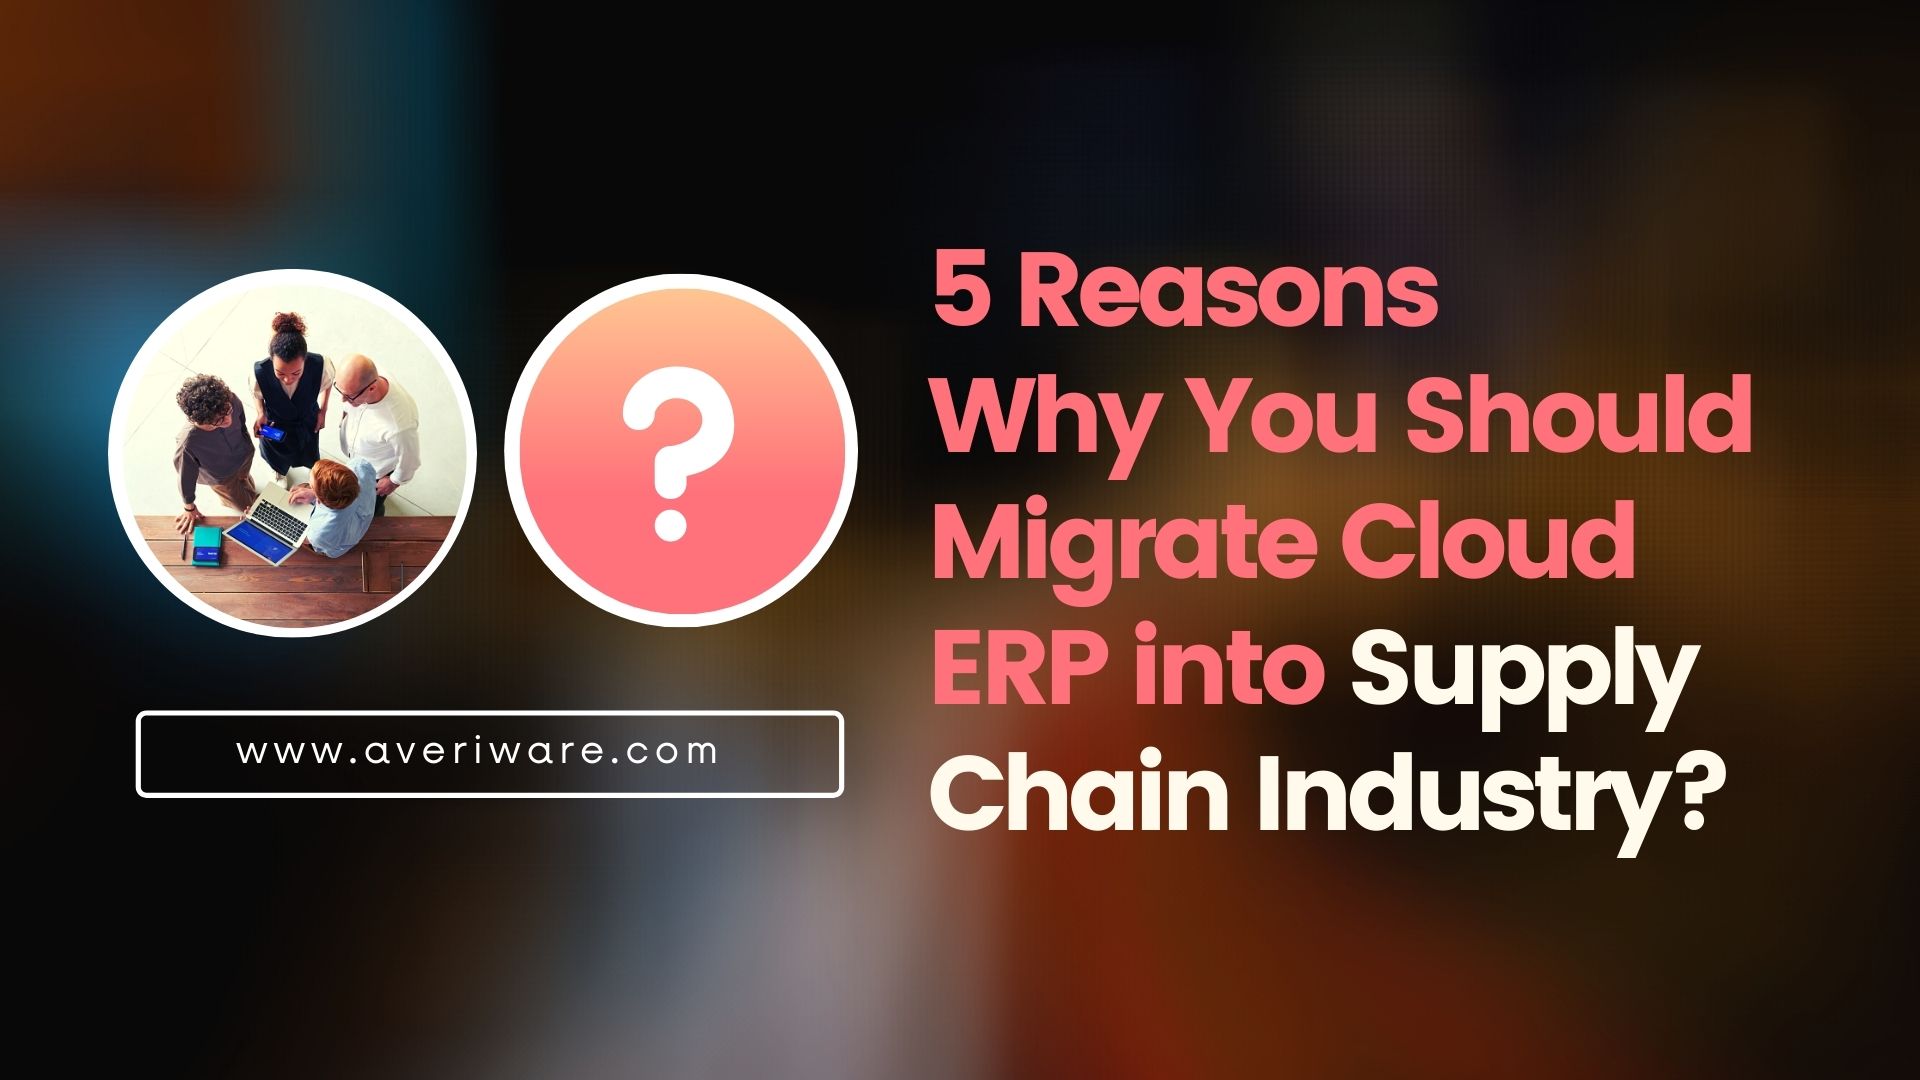 Why You Should Migrate Cloud ERP into Supply Chain Industry